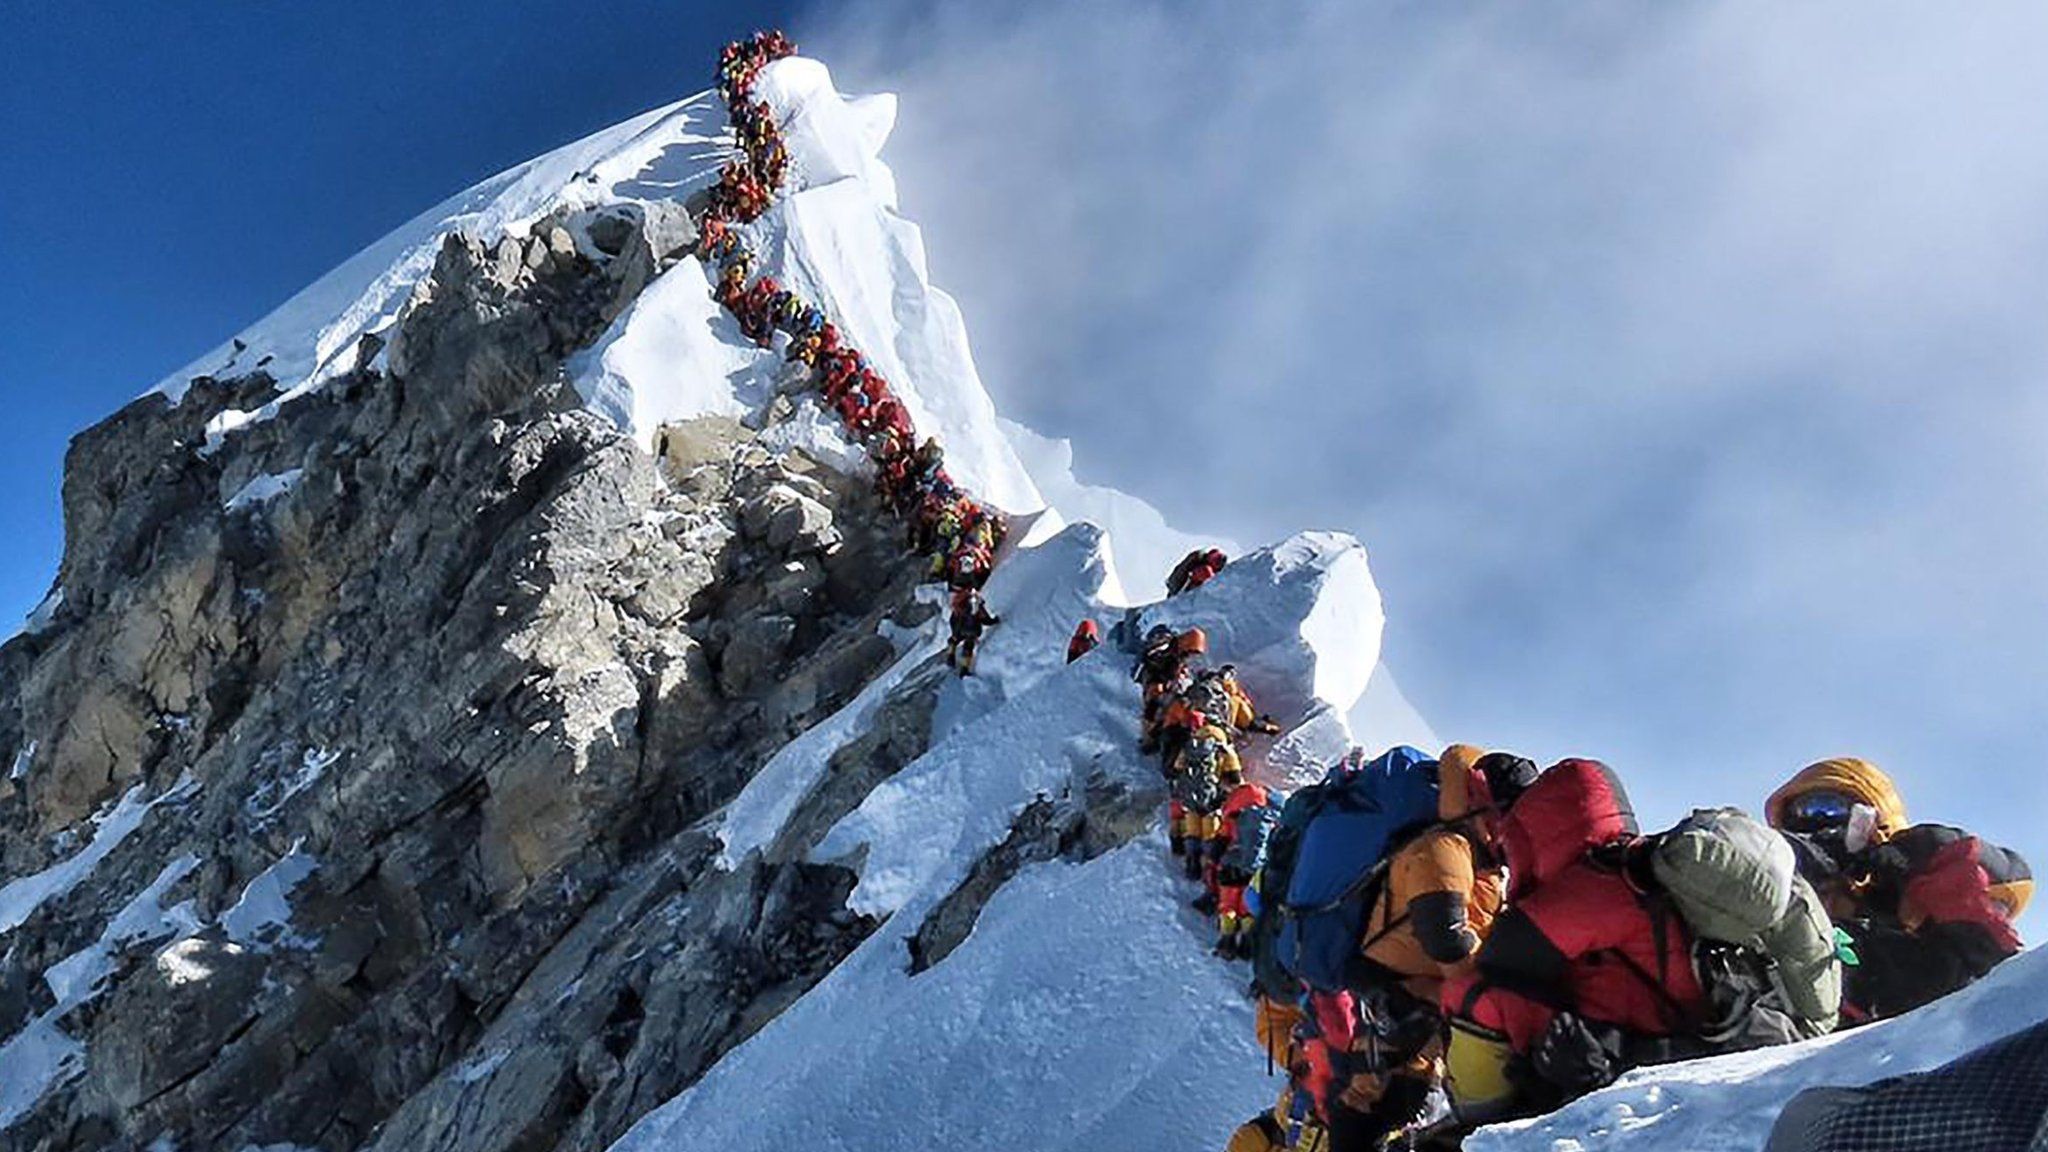 A photo from Nirmal Purja's Project Possible expedition shows a long queue of mountain climbers lining up to stand at the summit of Mount Everest